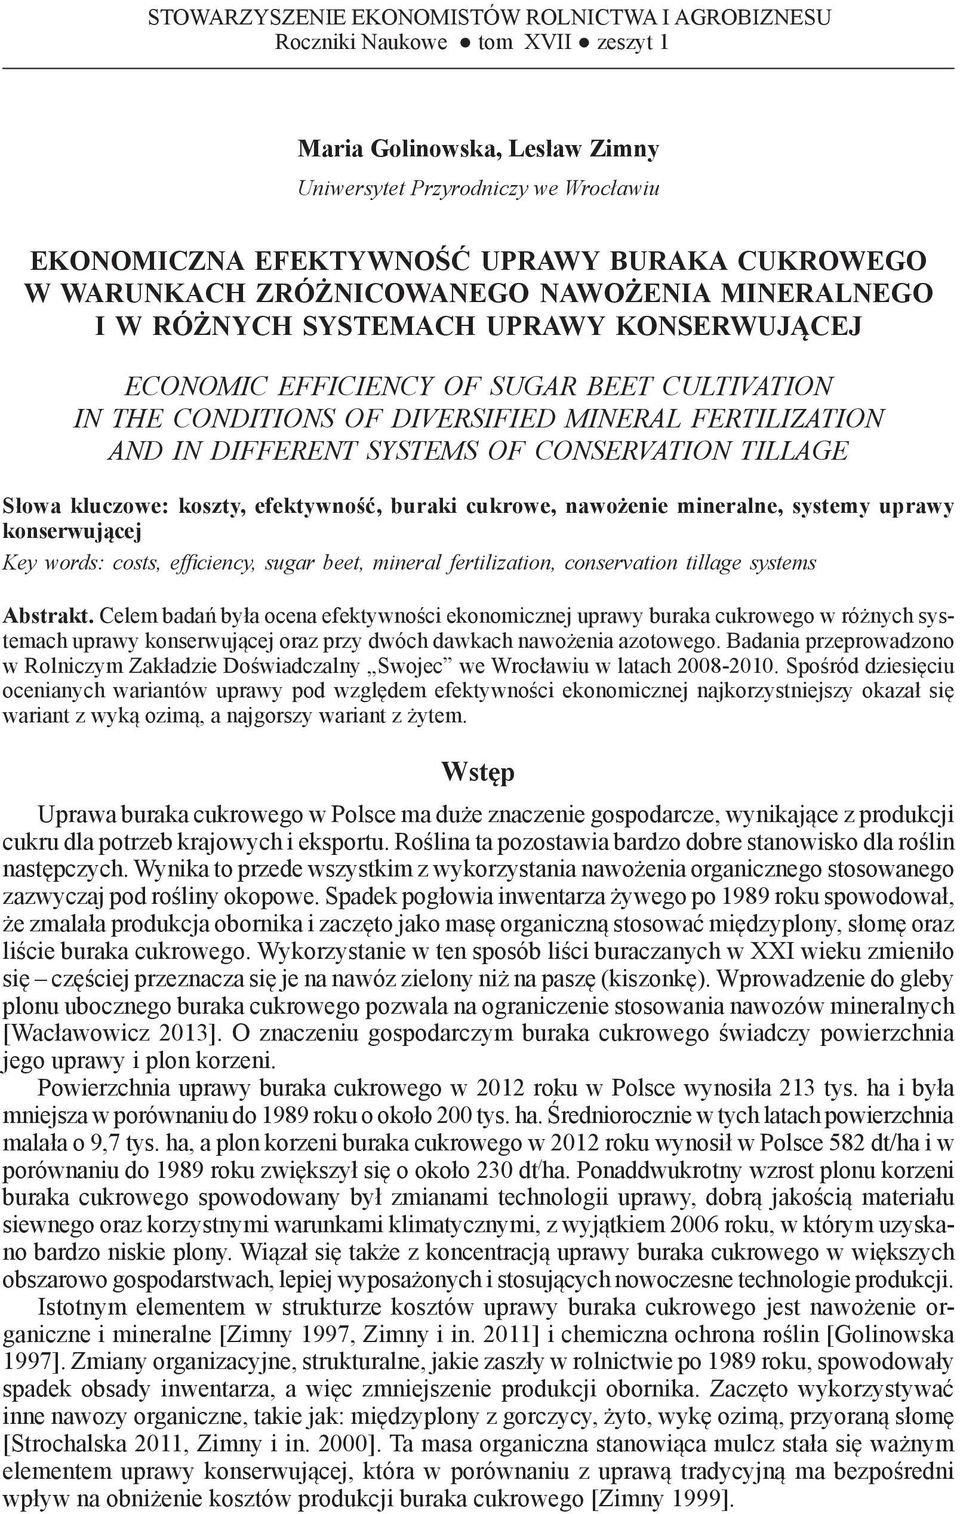 MINERALNEGO I W RÓŻNYCH SYSTEMACH UPRAWY KONSERWUJĄCEJ ECONOMIC EFFICIENCY OF SUGAR BEET CULTIVATION IN THE CONDITIONS OF DIVERSIFIED MINERAL FERTILIZATION AND IN DIFFERENT SYSTEMS OF CONSERVATION